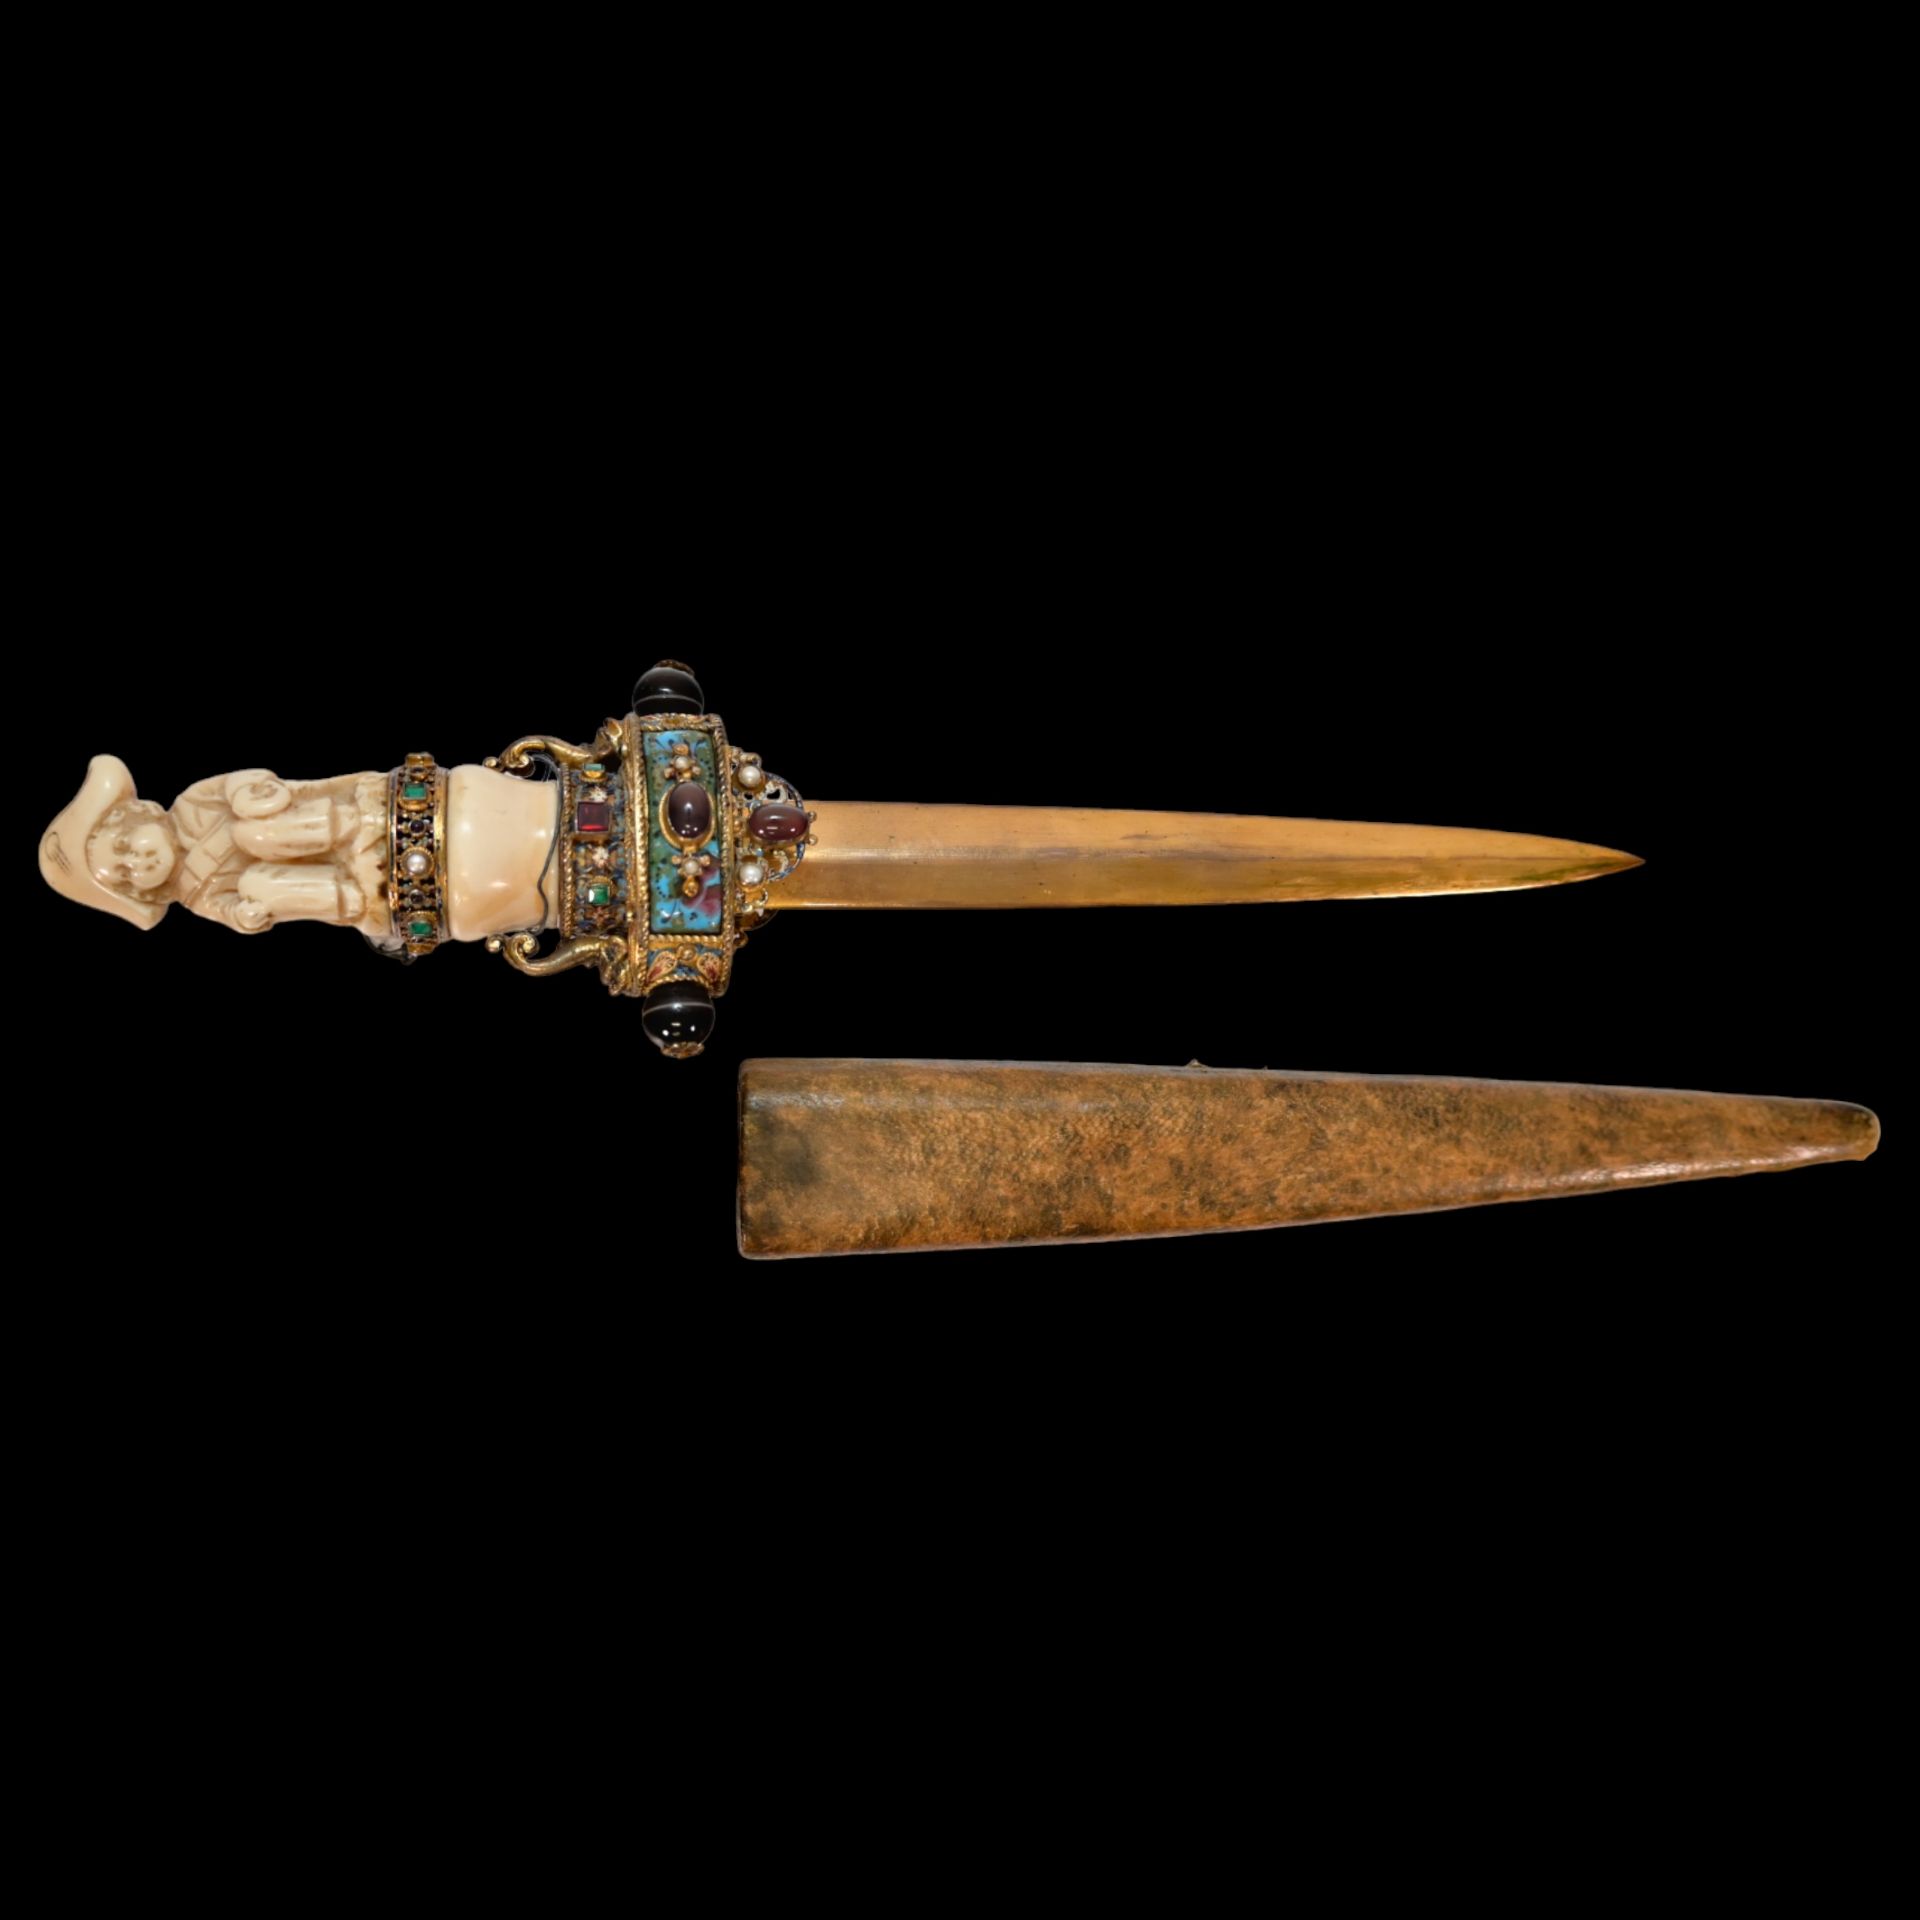 A unique Austrian dagger with a carved bone hilt decorated with gold, precious stones and enamel. - Image 14 of 19